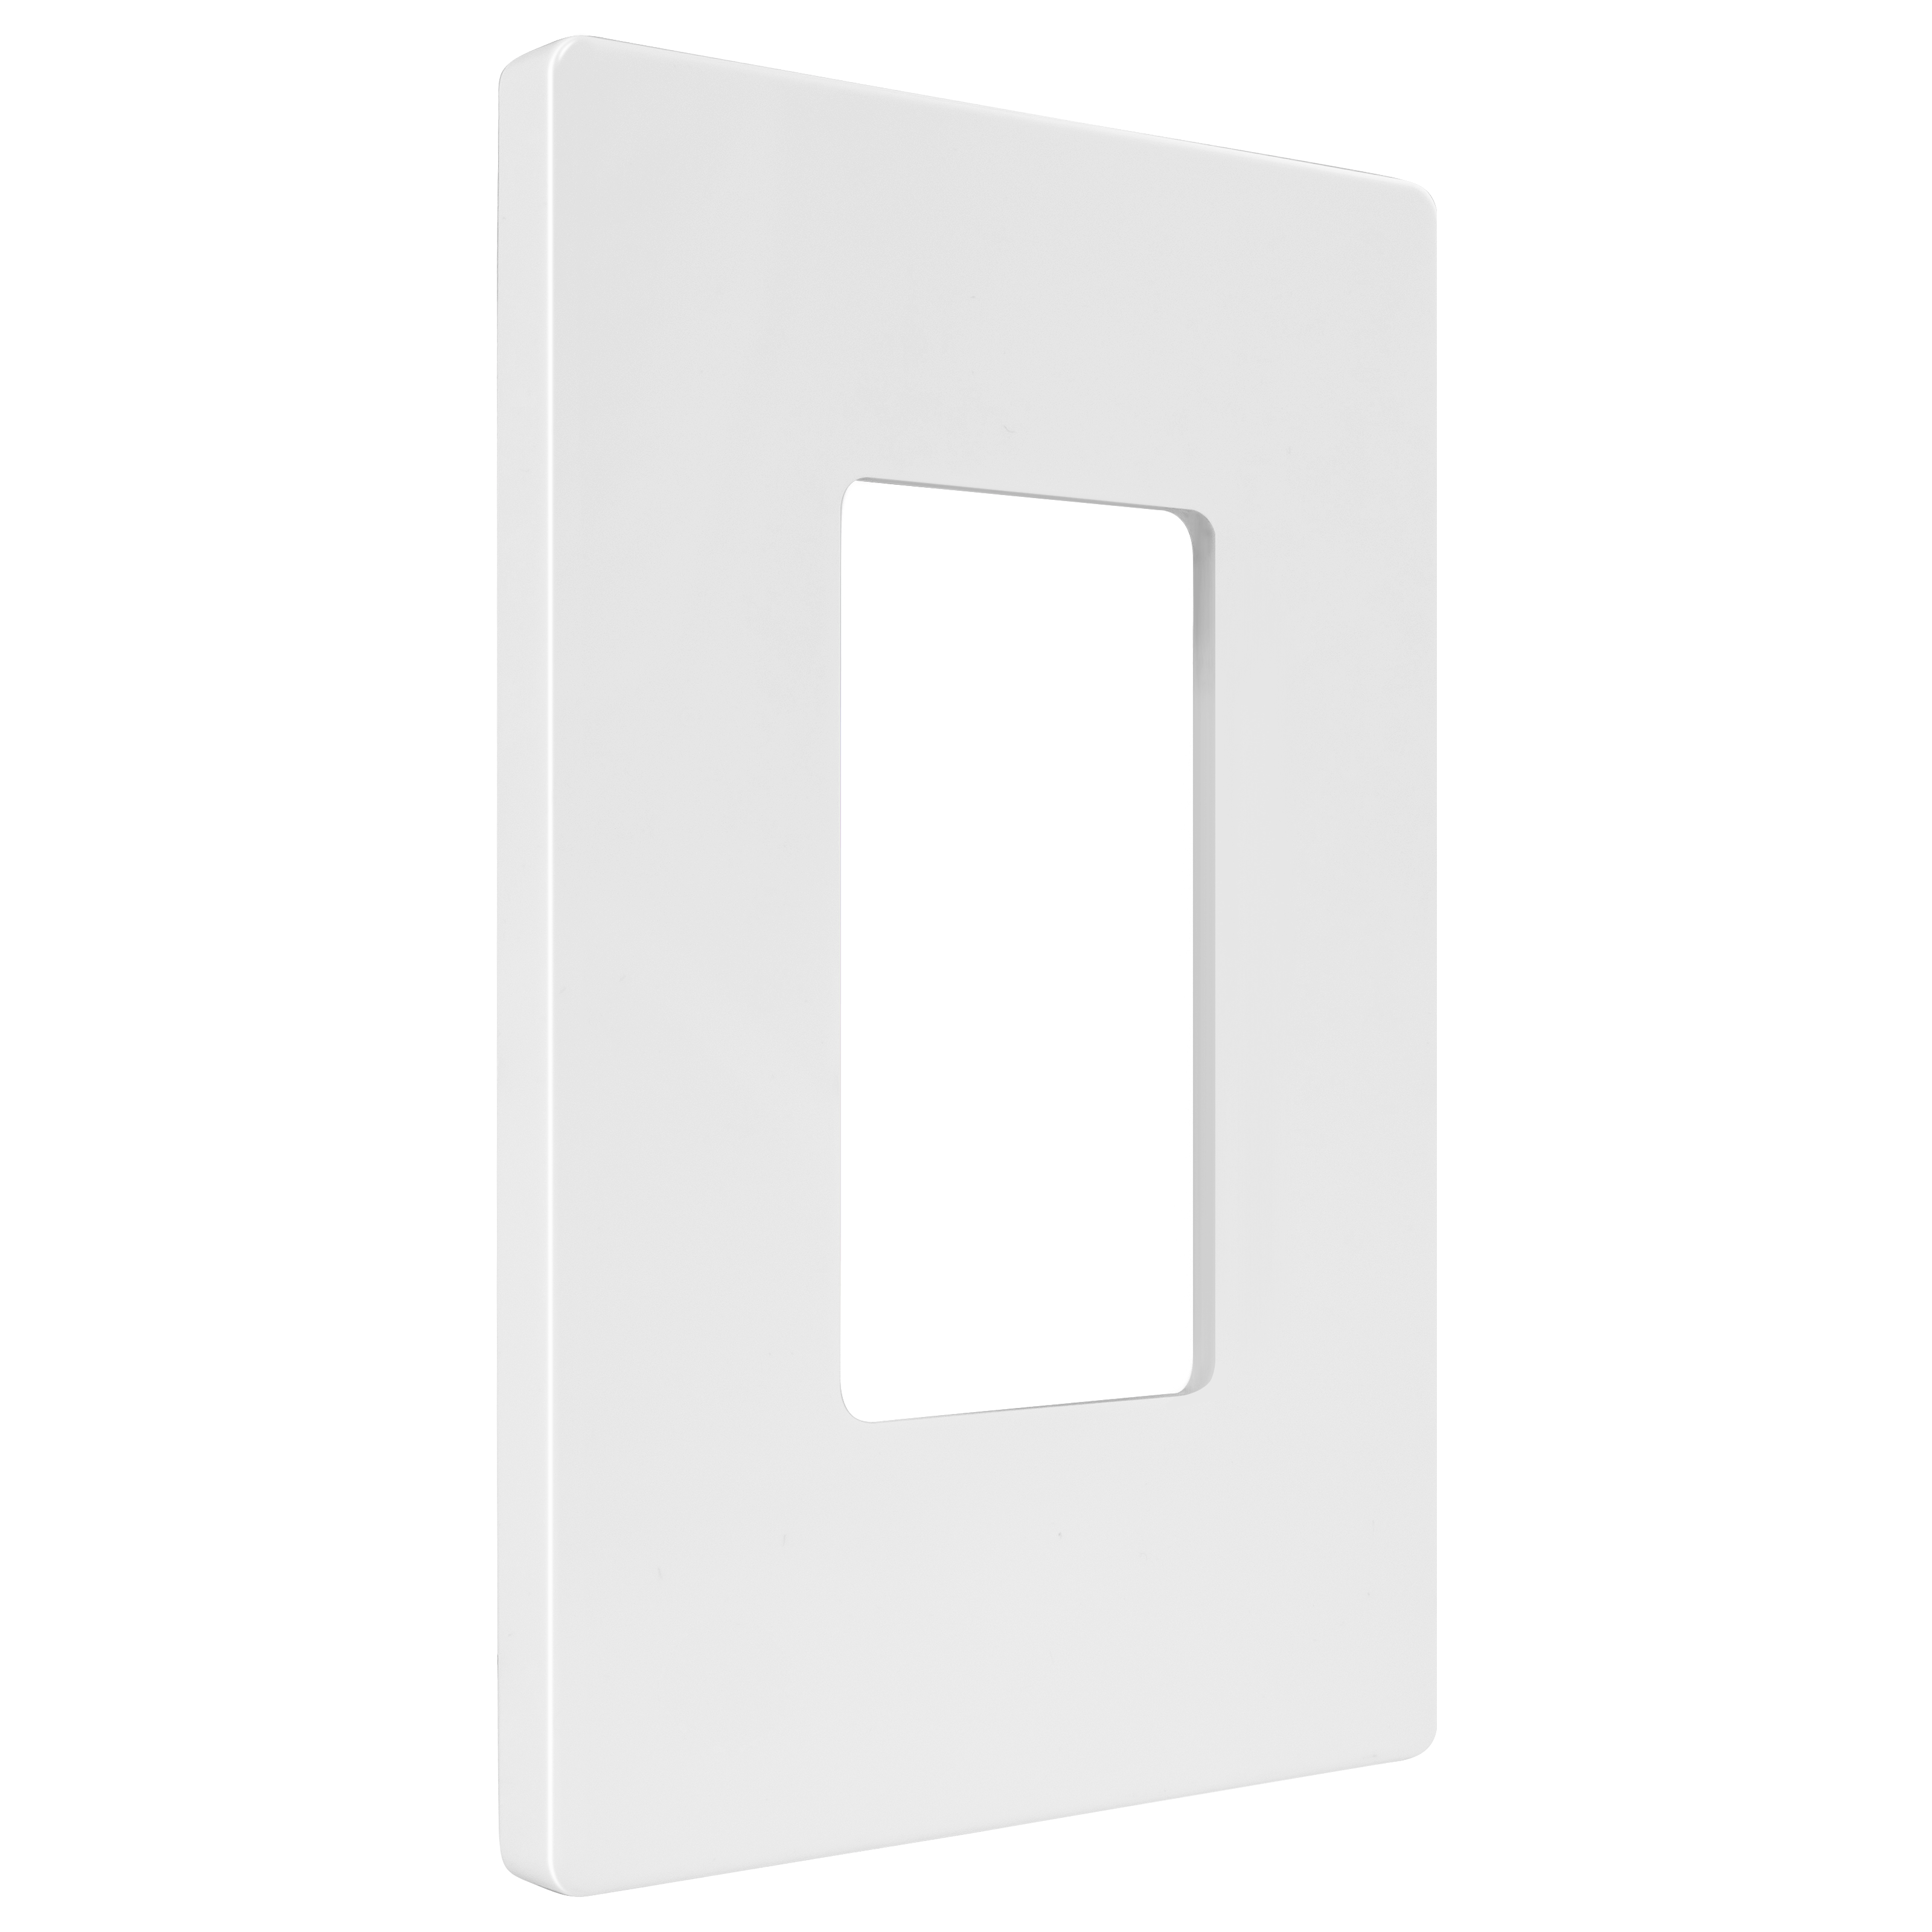 Rêve Collection Luxury Decorator Switch Cover, Screwless Wall Plate